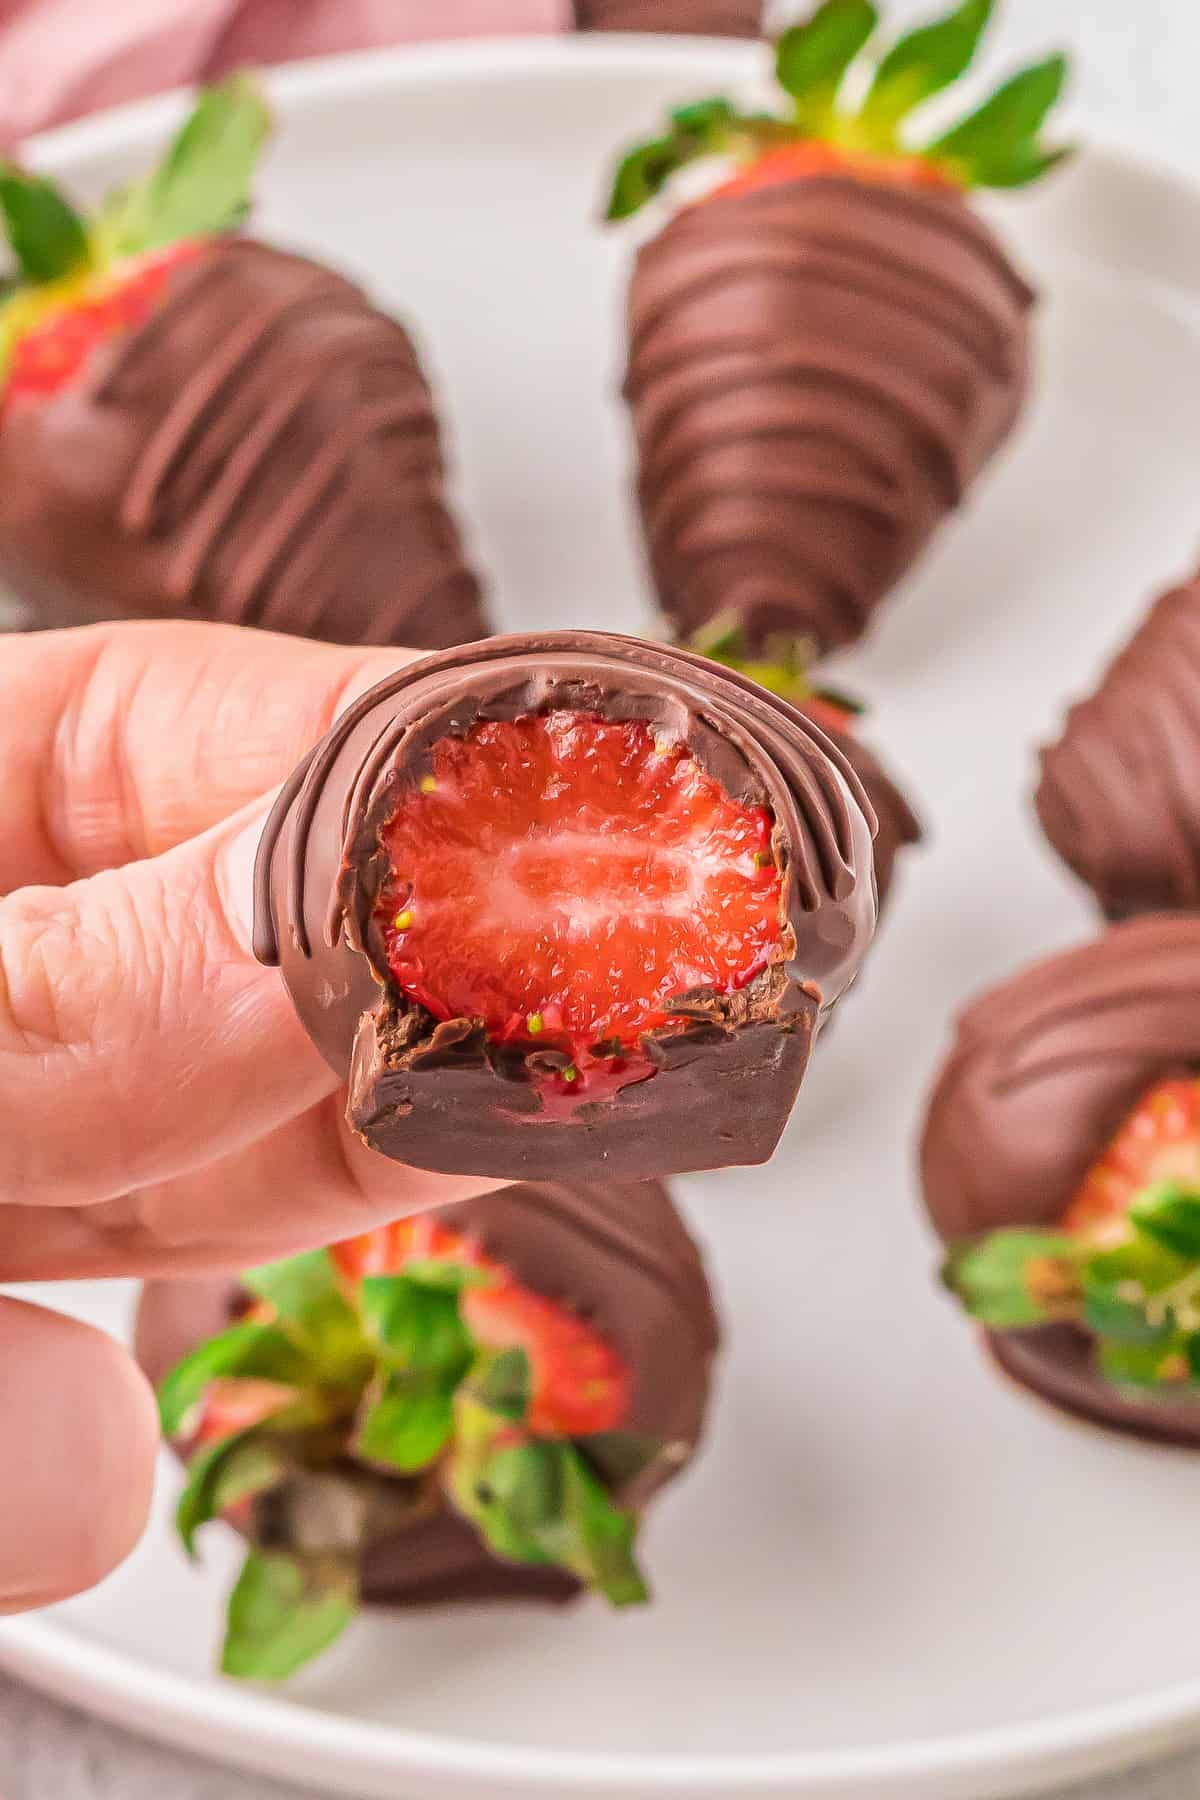 Vegan chocolate covered strawberry with a bite removed.